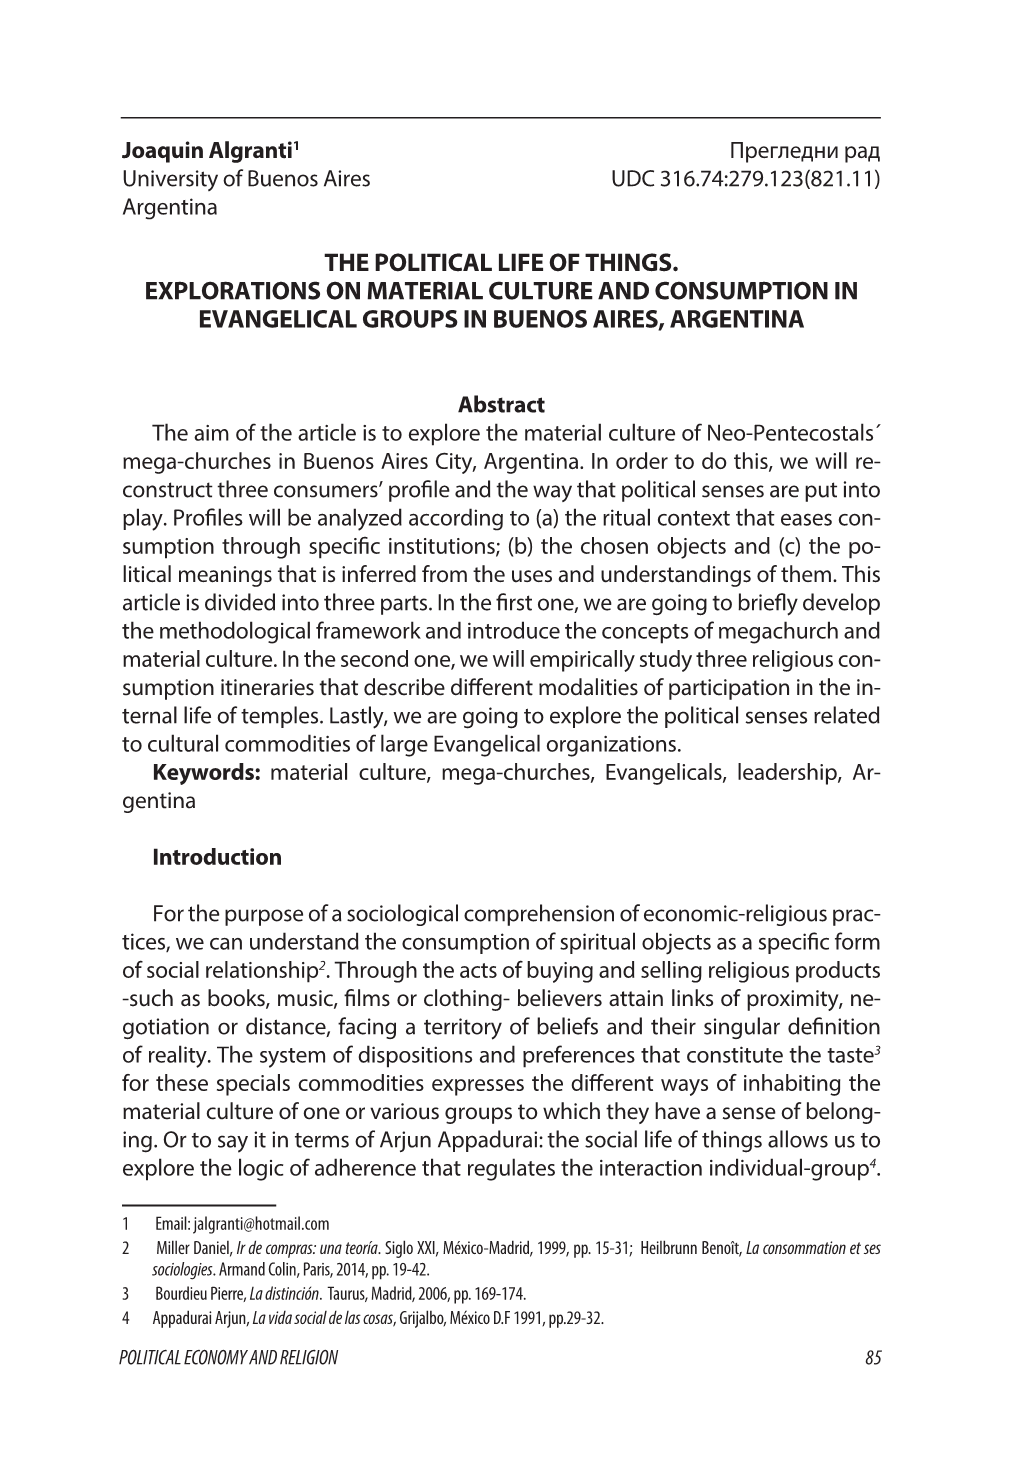 The Political Life of Things. Explorations on Material Culture and Consumption in Evangelical Groups in Buenos Aires, Argentina